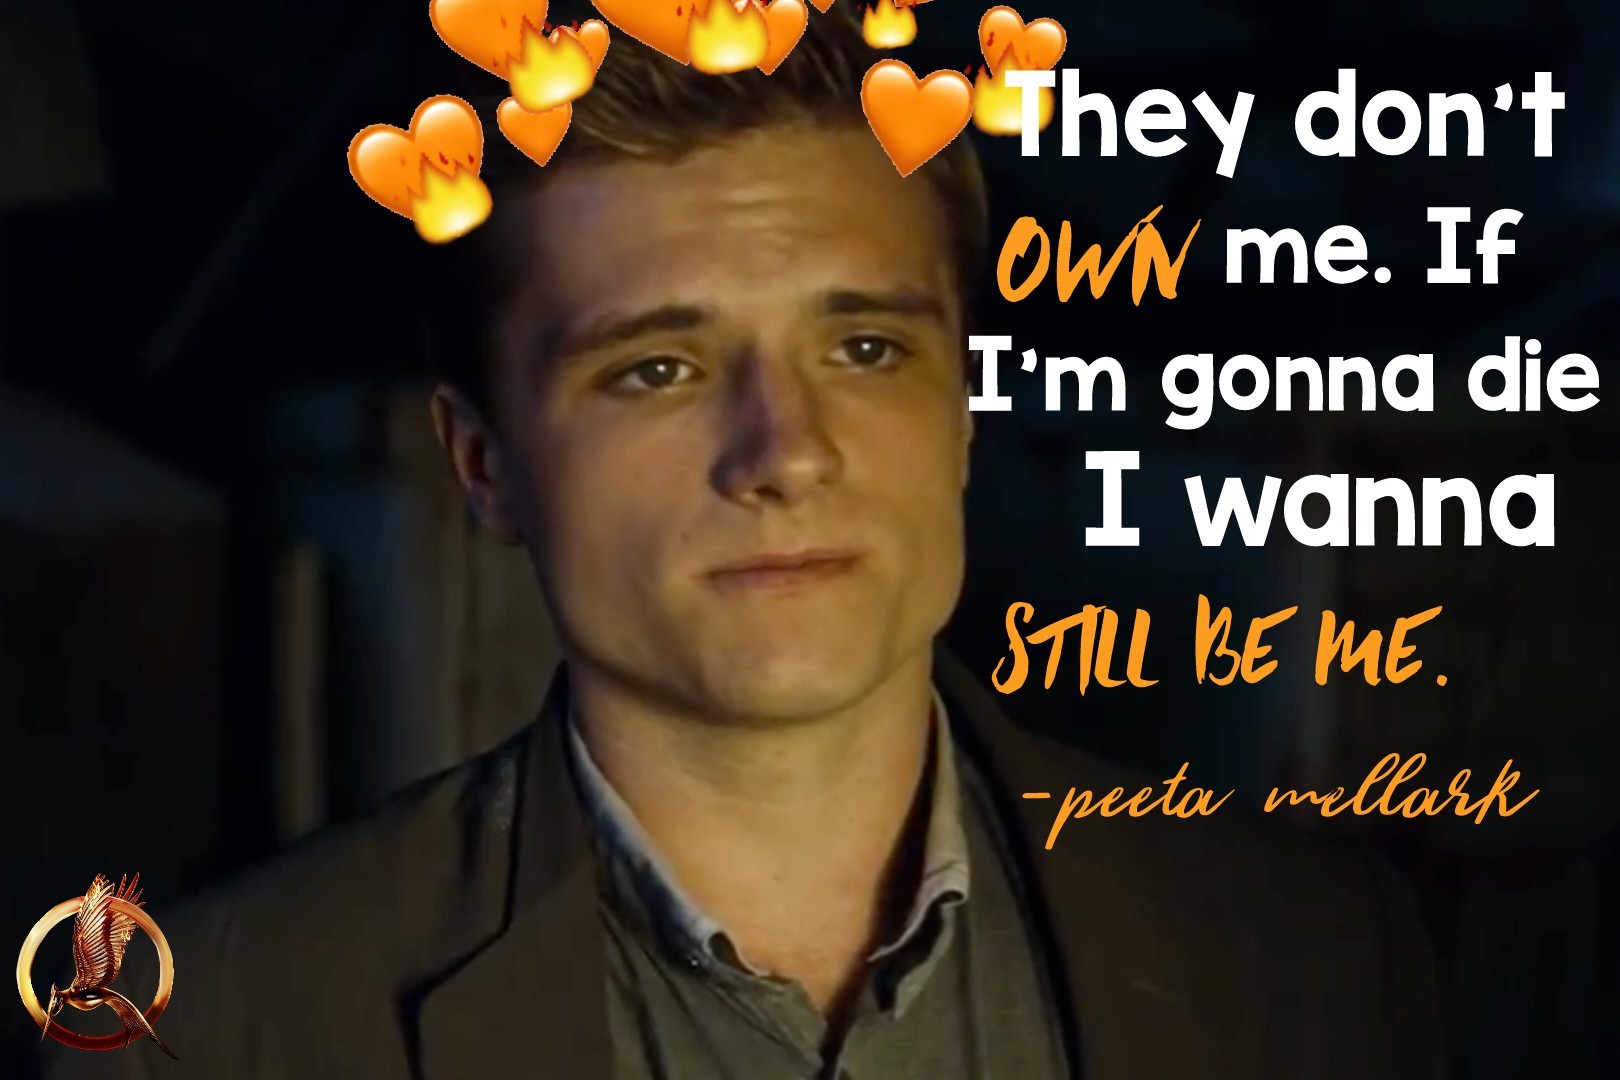 🧡Tap🧡

Hi everyone! I'm going to try uploading everyday again! So here is todays! Peeta Mellark from the Hunger Games. Peeta is my favorite character and you can't change my mind lol. Hope you have a lovely day 🧡